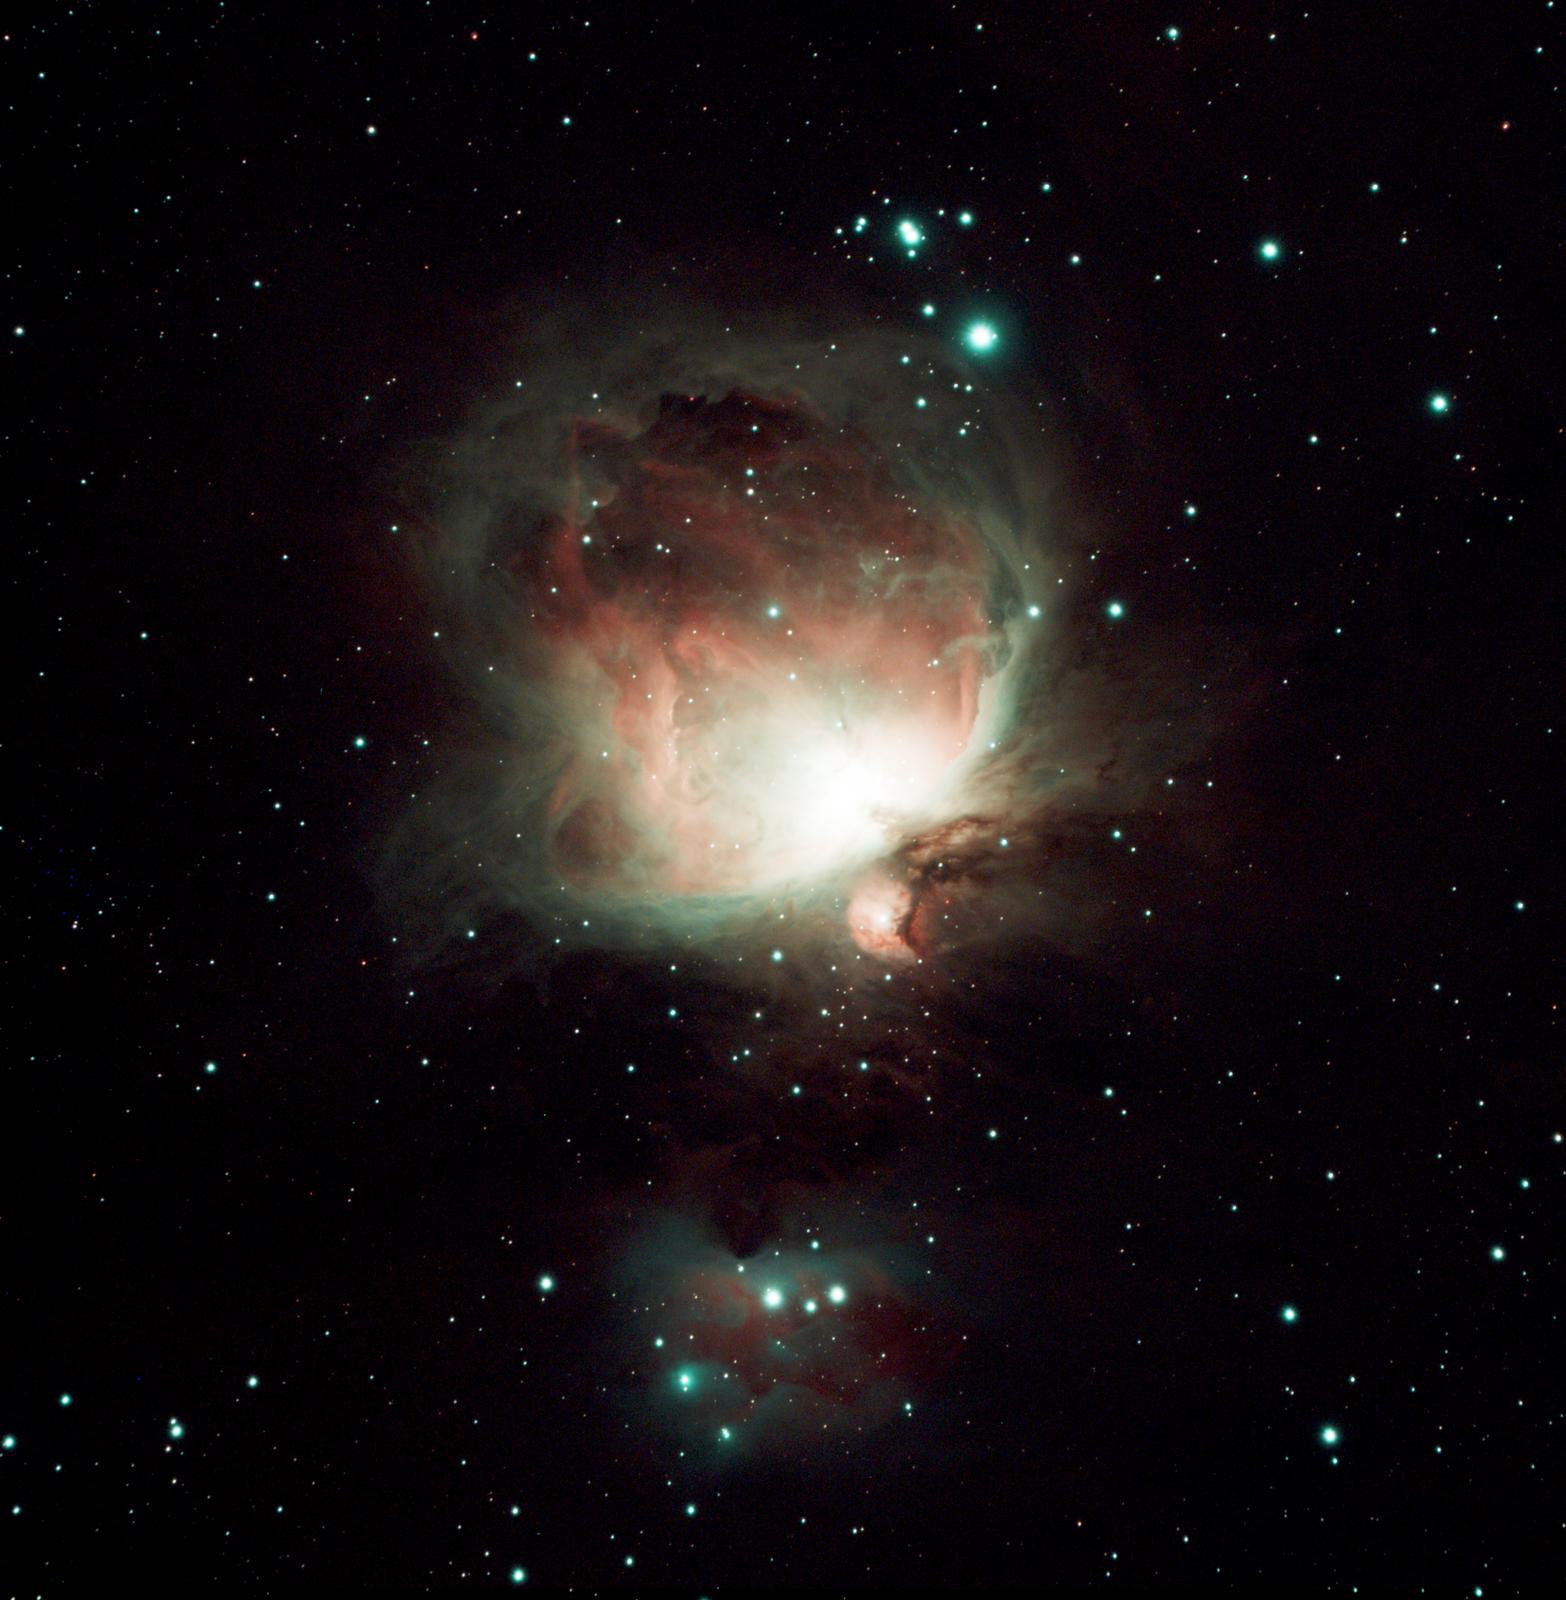 M42 with some processing in GIMP